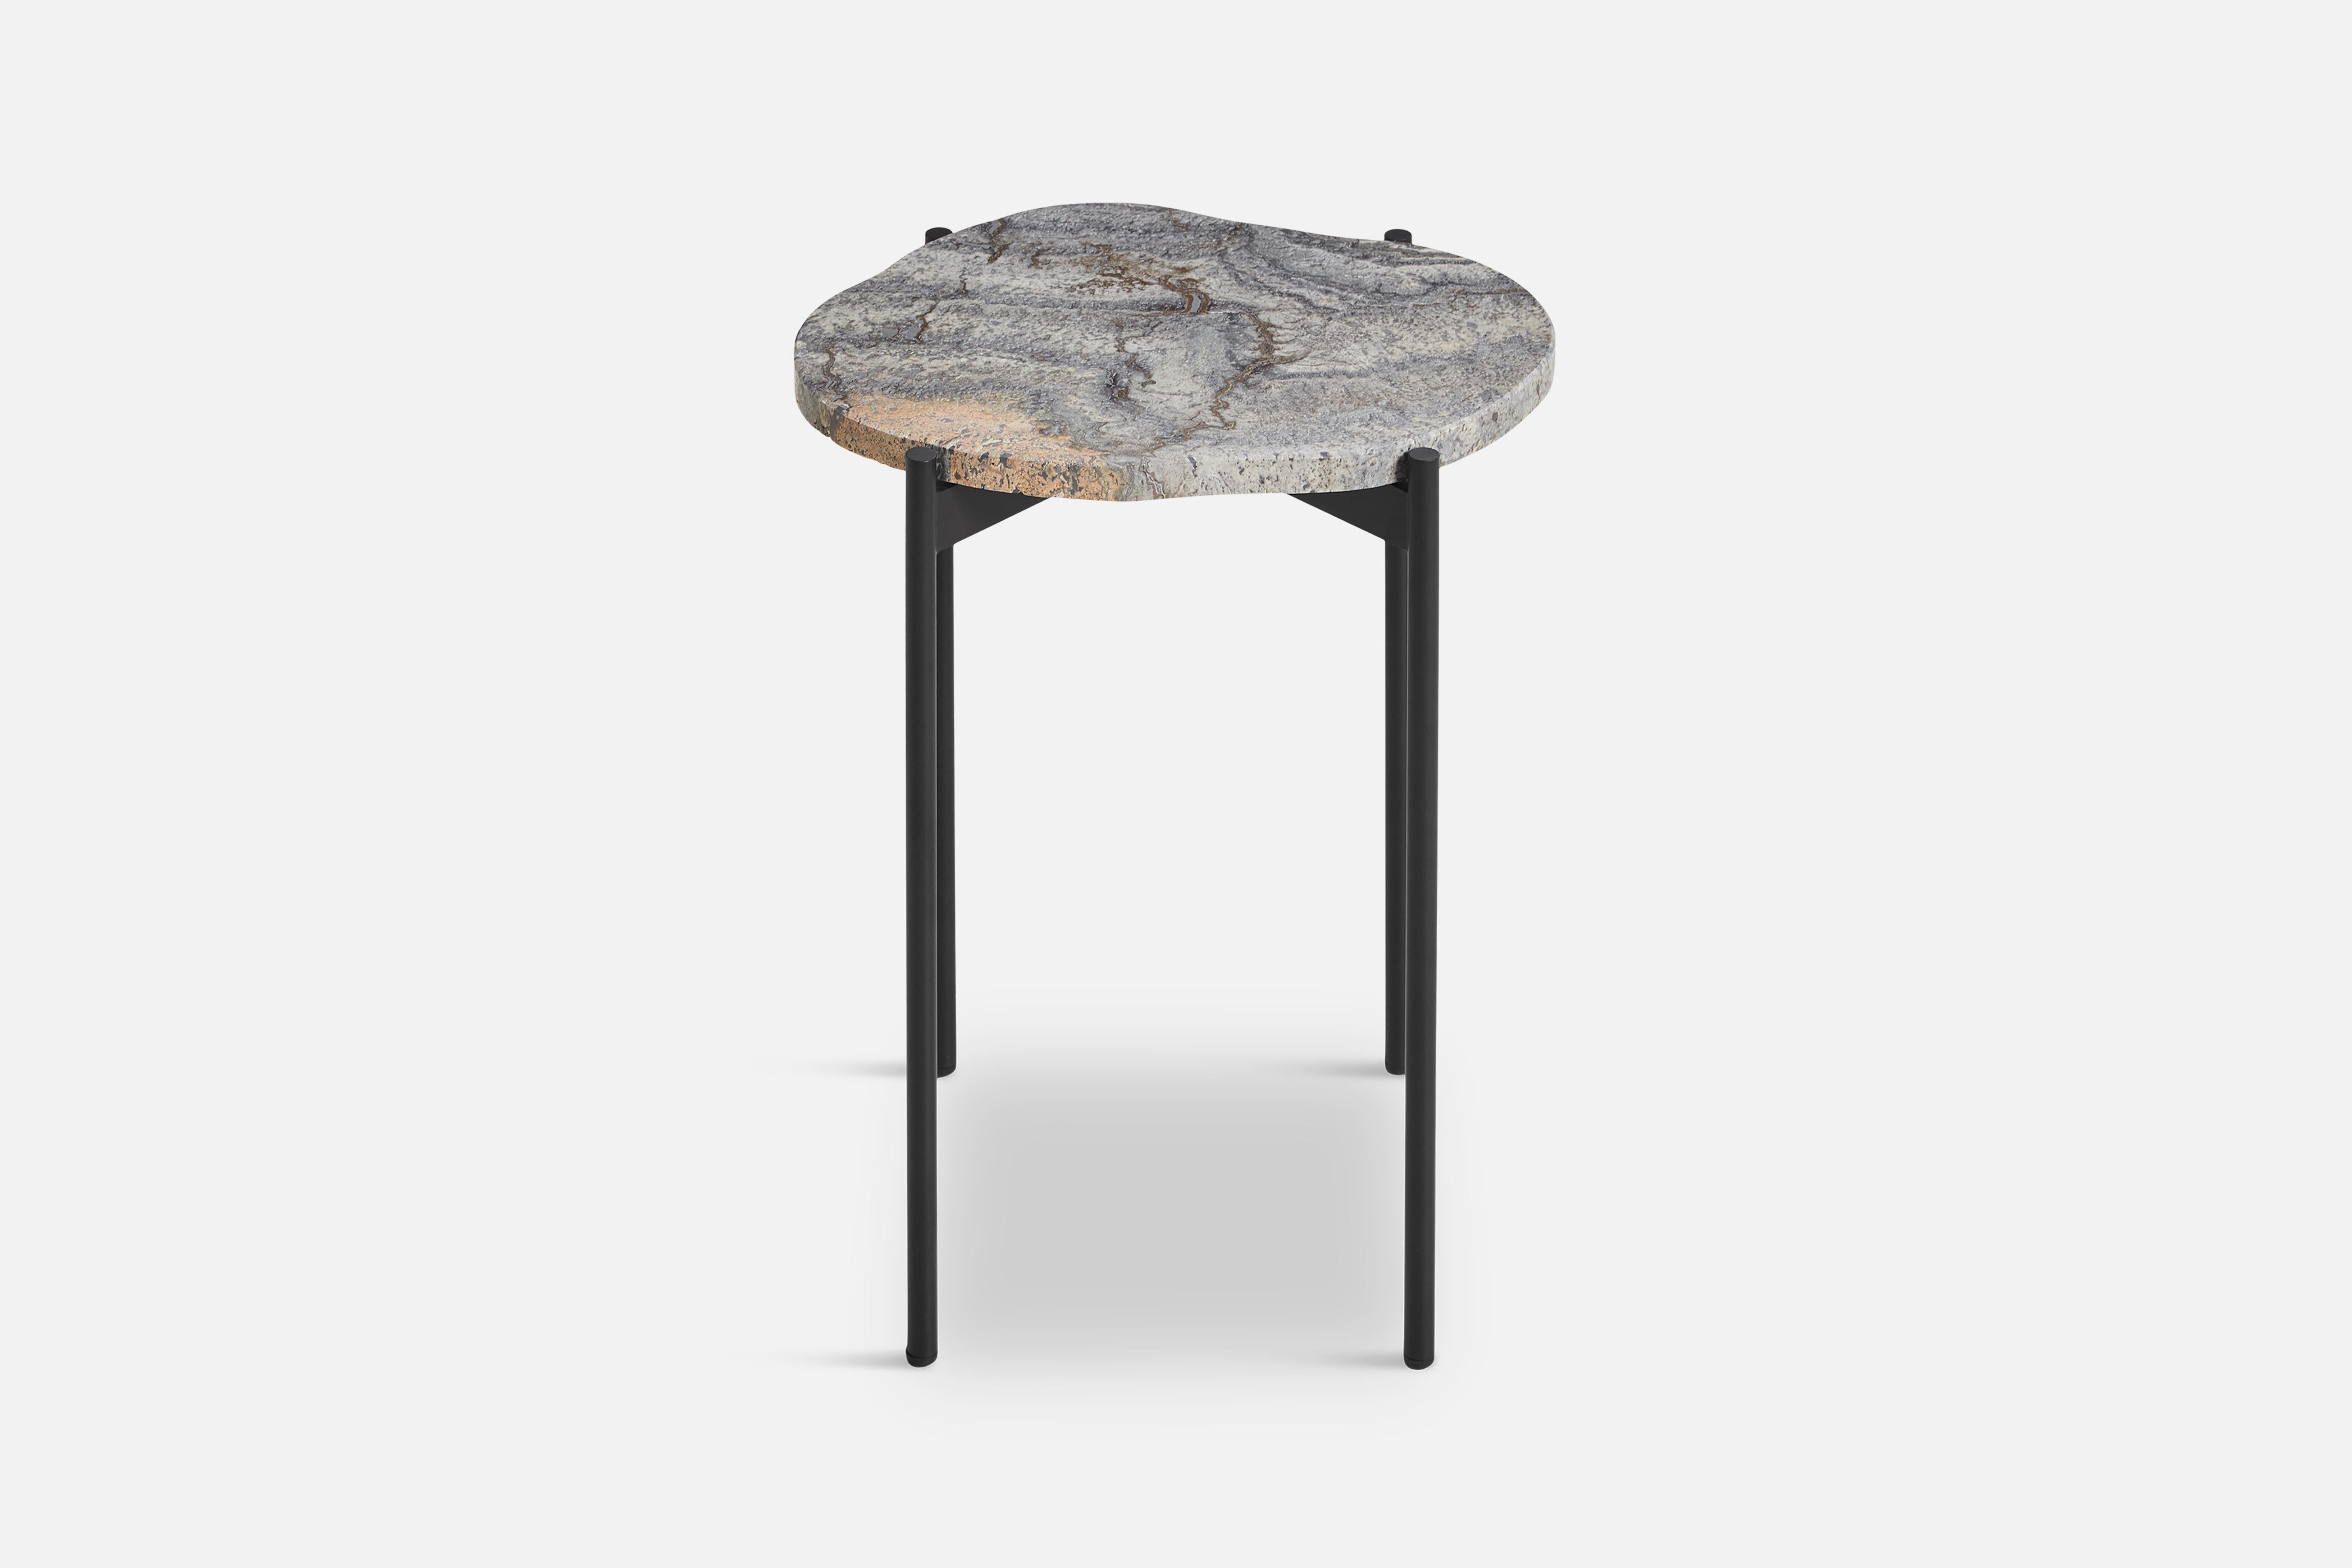 La Terra small occasional table by Agnes Morguet
Materials: Metal, Grey Melange Travertine
Dimensions: D 31.2 x W 40.5 x H 45.7 cm

The founders, Mia and Torben Koed, decided to put their 30 years of experience into a new project. It was time